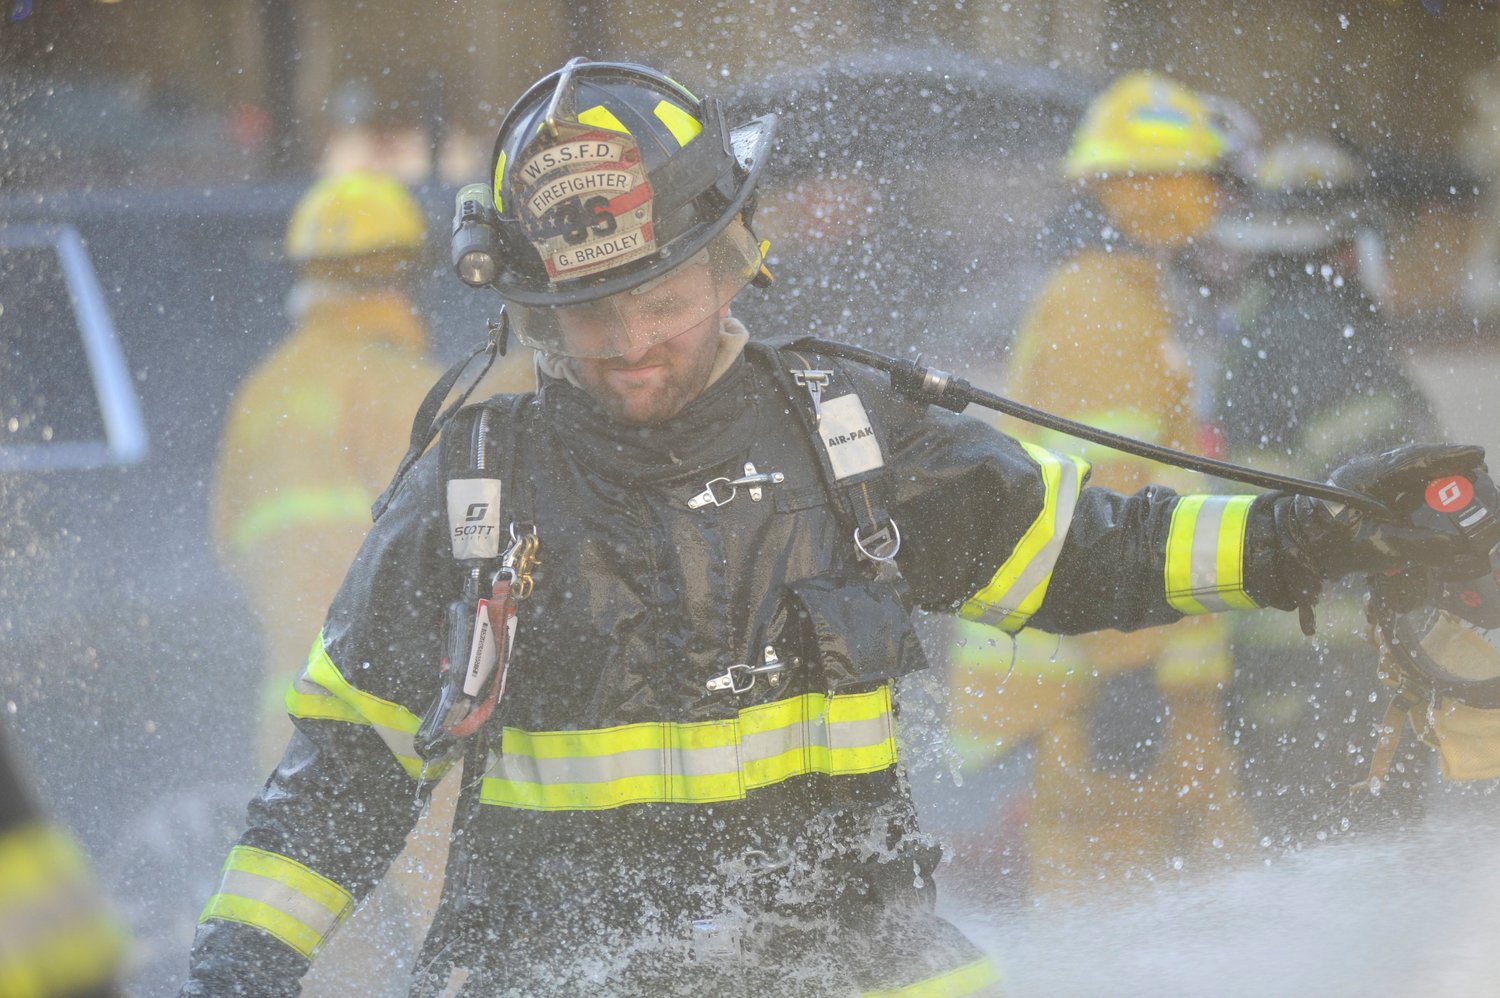 G. Bradley of the White Sulphur Springs VFD was among the firefighters who were hosed down after the fire.